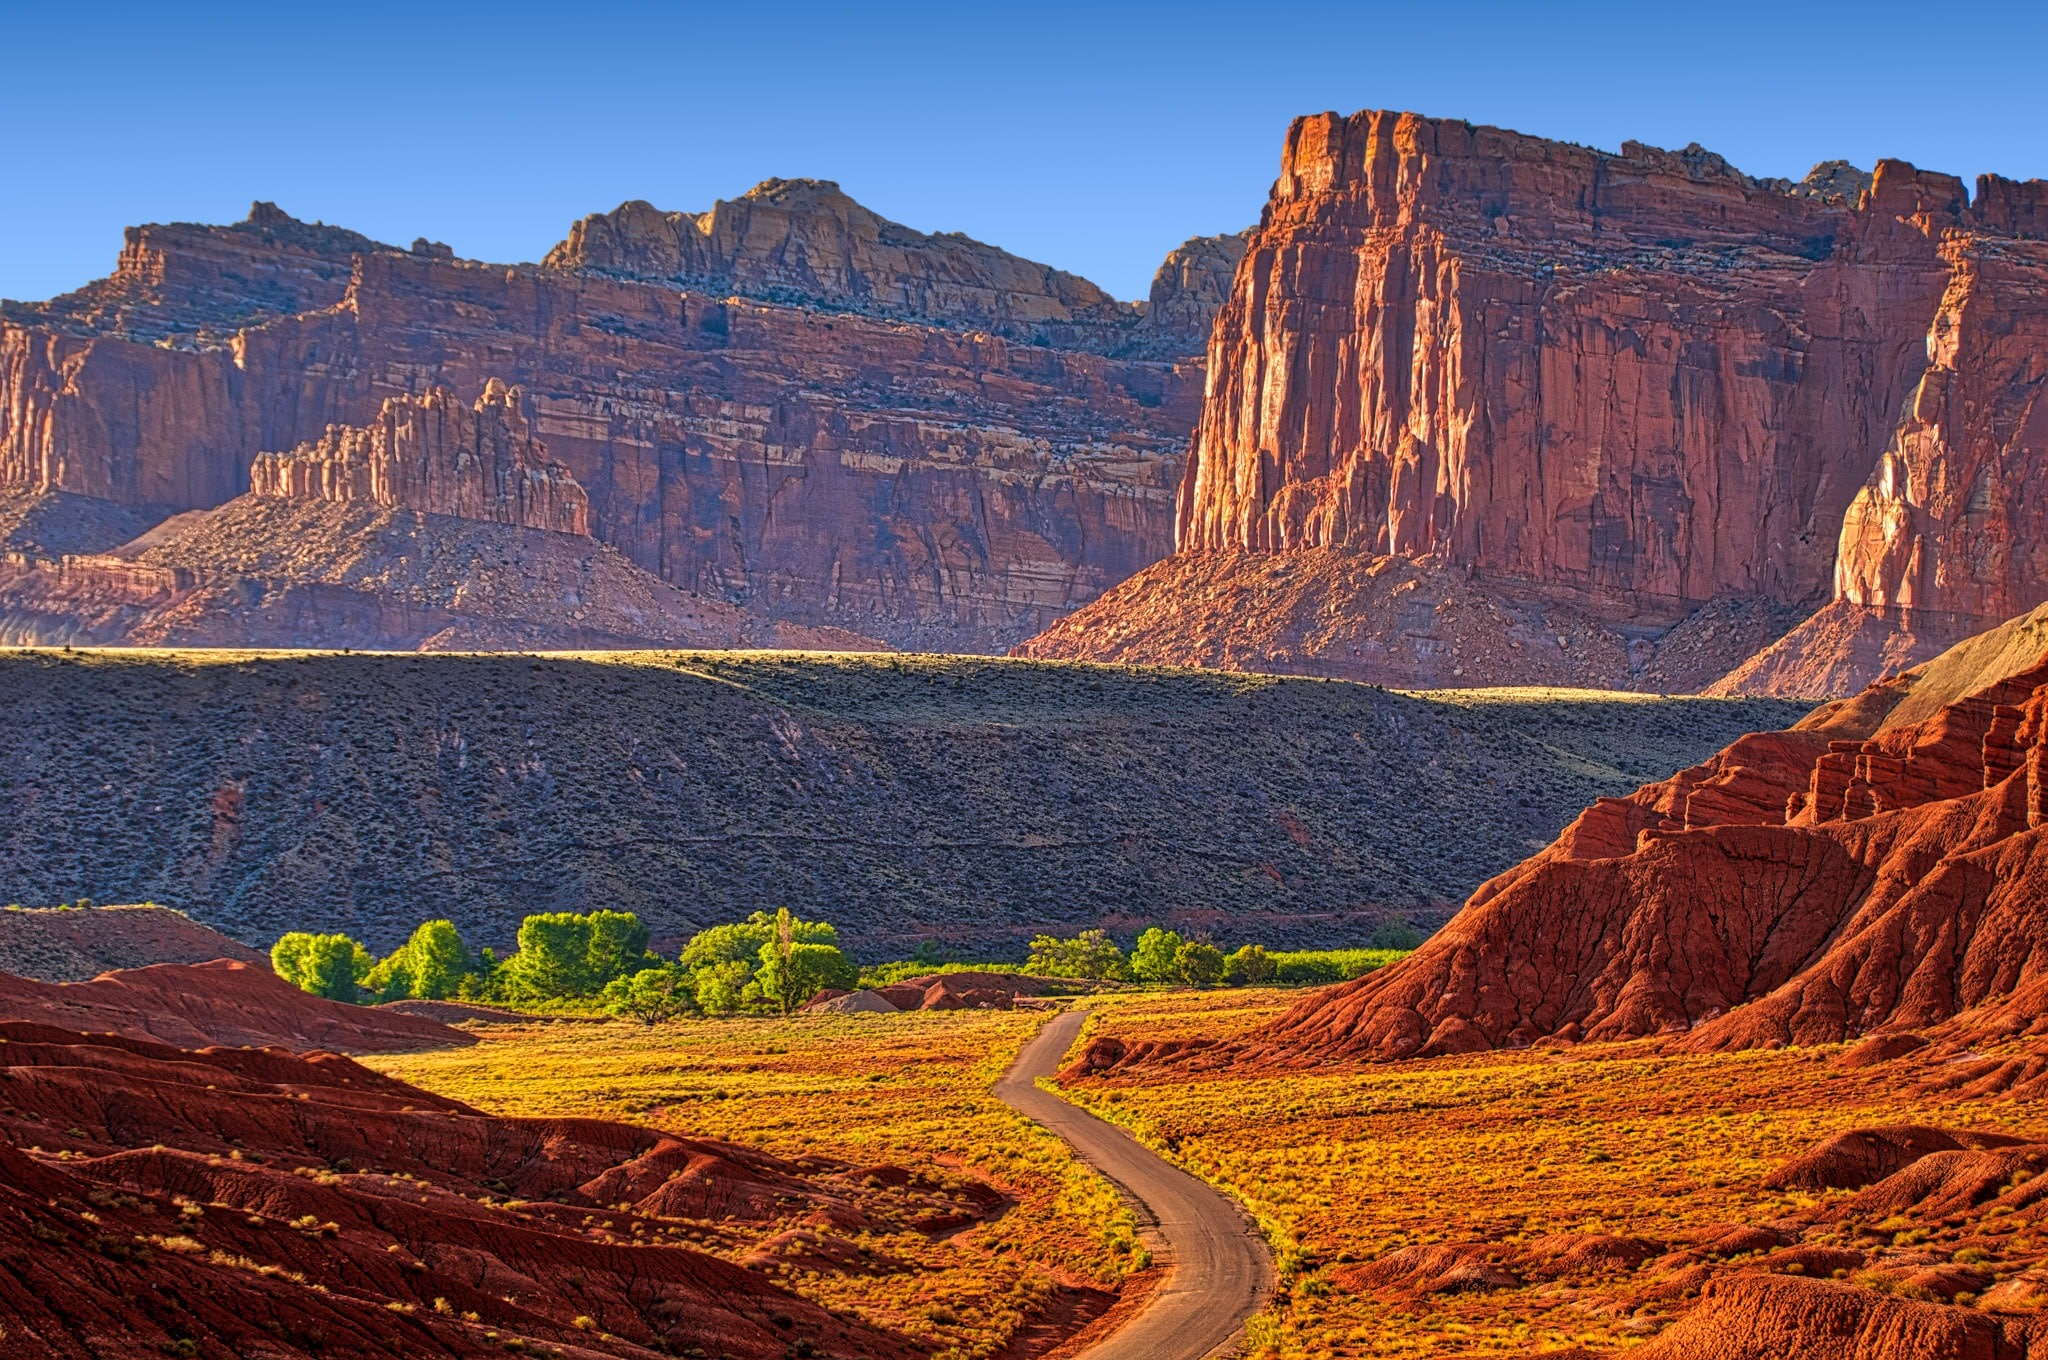 The afternoon light enhances the rich colors of the Moenkopi, Chinle, Wingate, and Navajo formations, as seen from Scenic Drive, south of Fruita in Capitol Reef National Park, Utah.